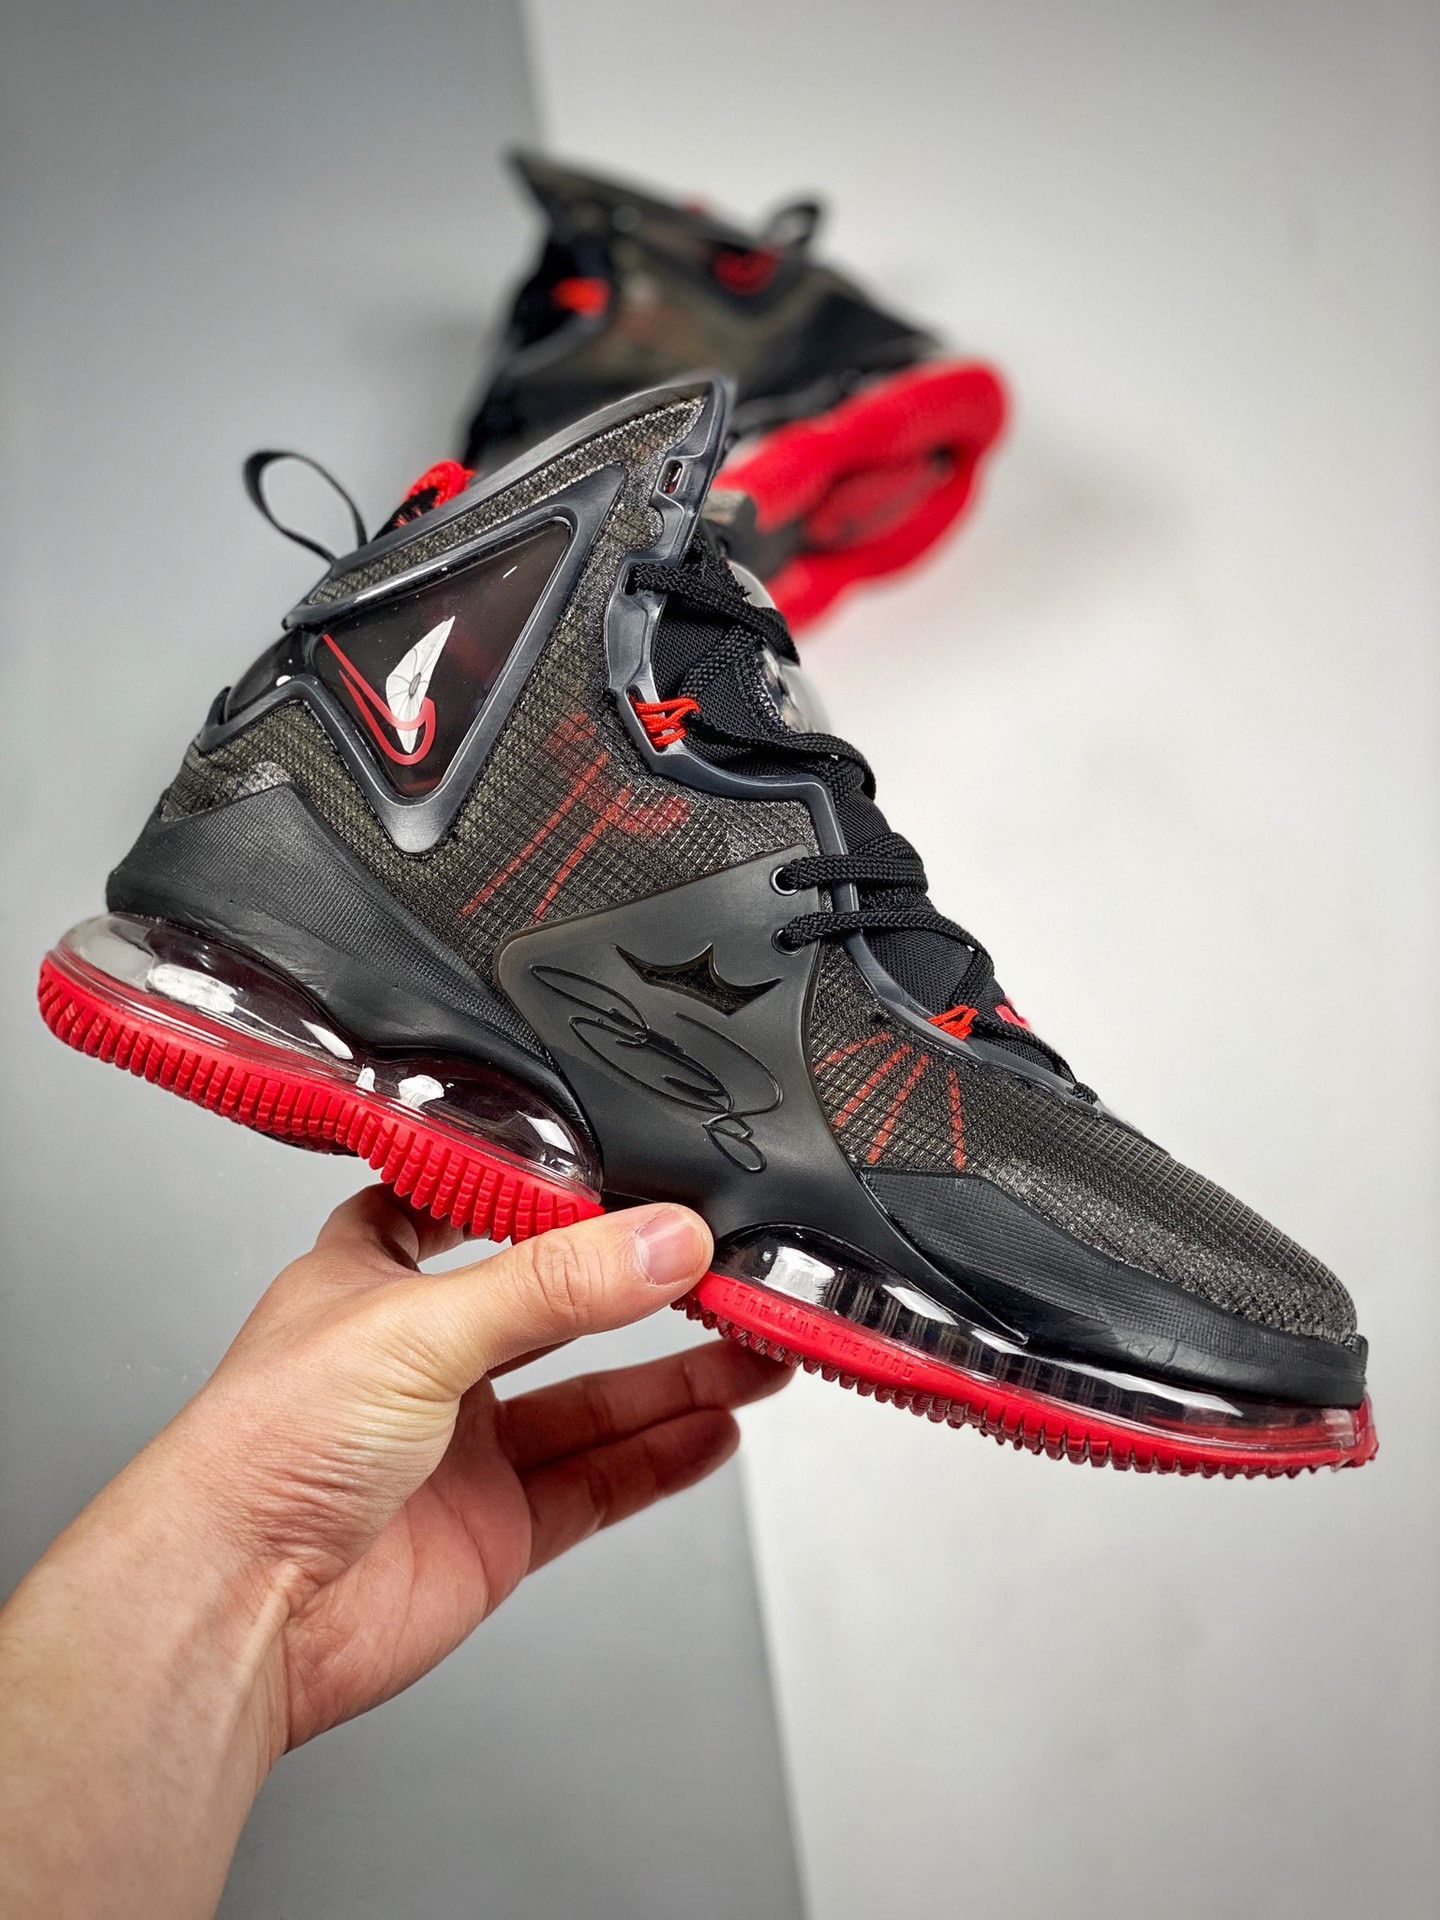 Nike LeBron 19 Bred Black Red DC9340-001 For Sale